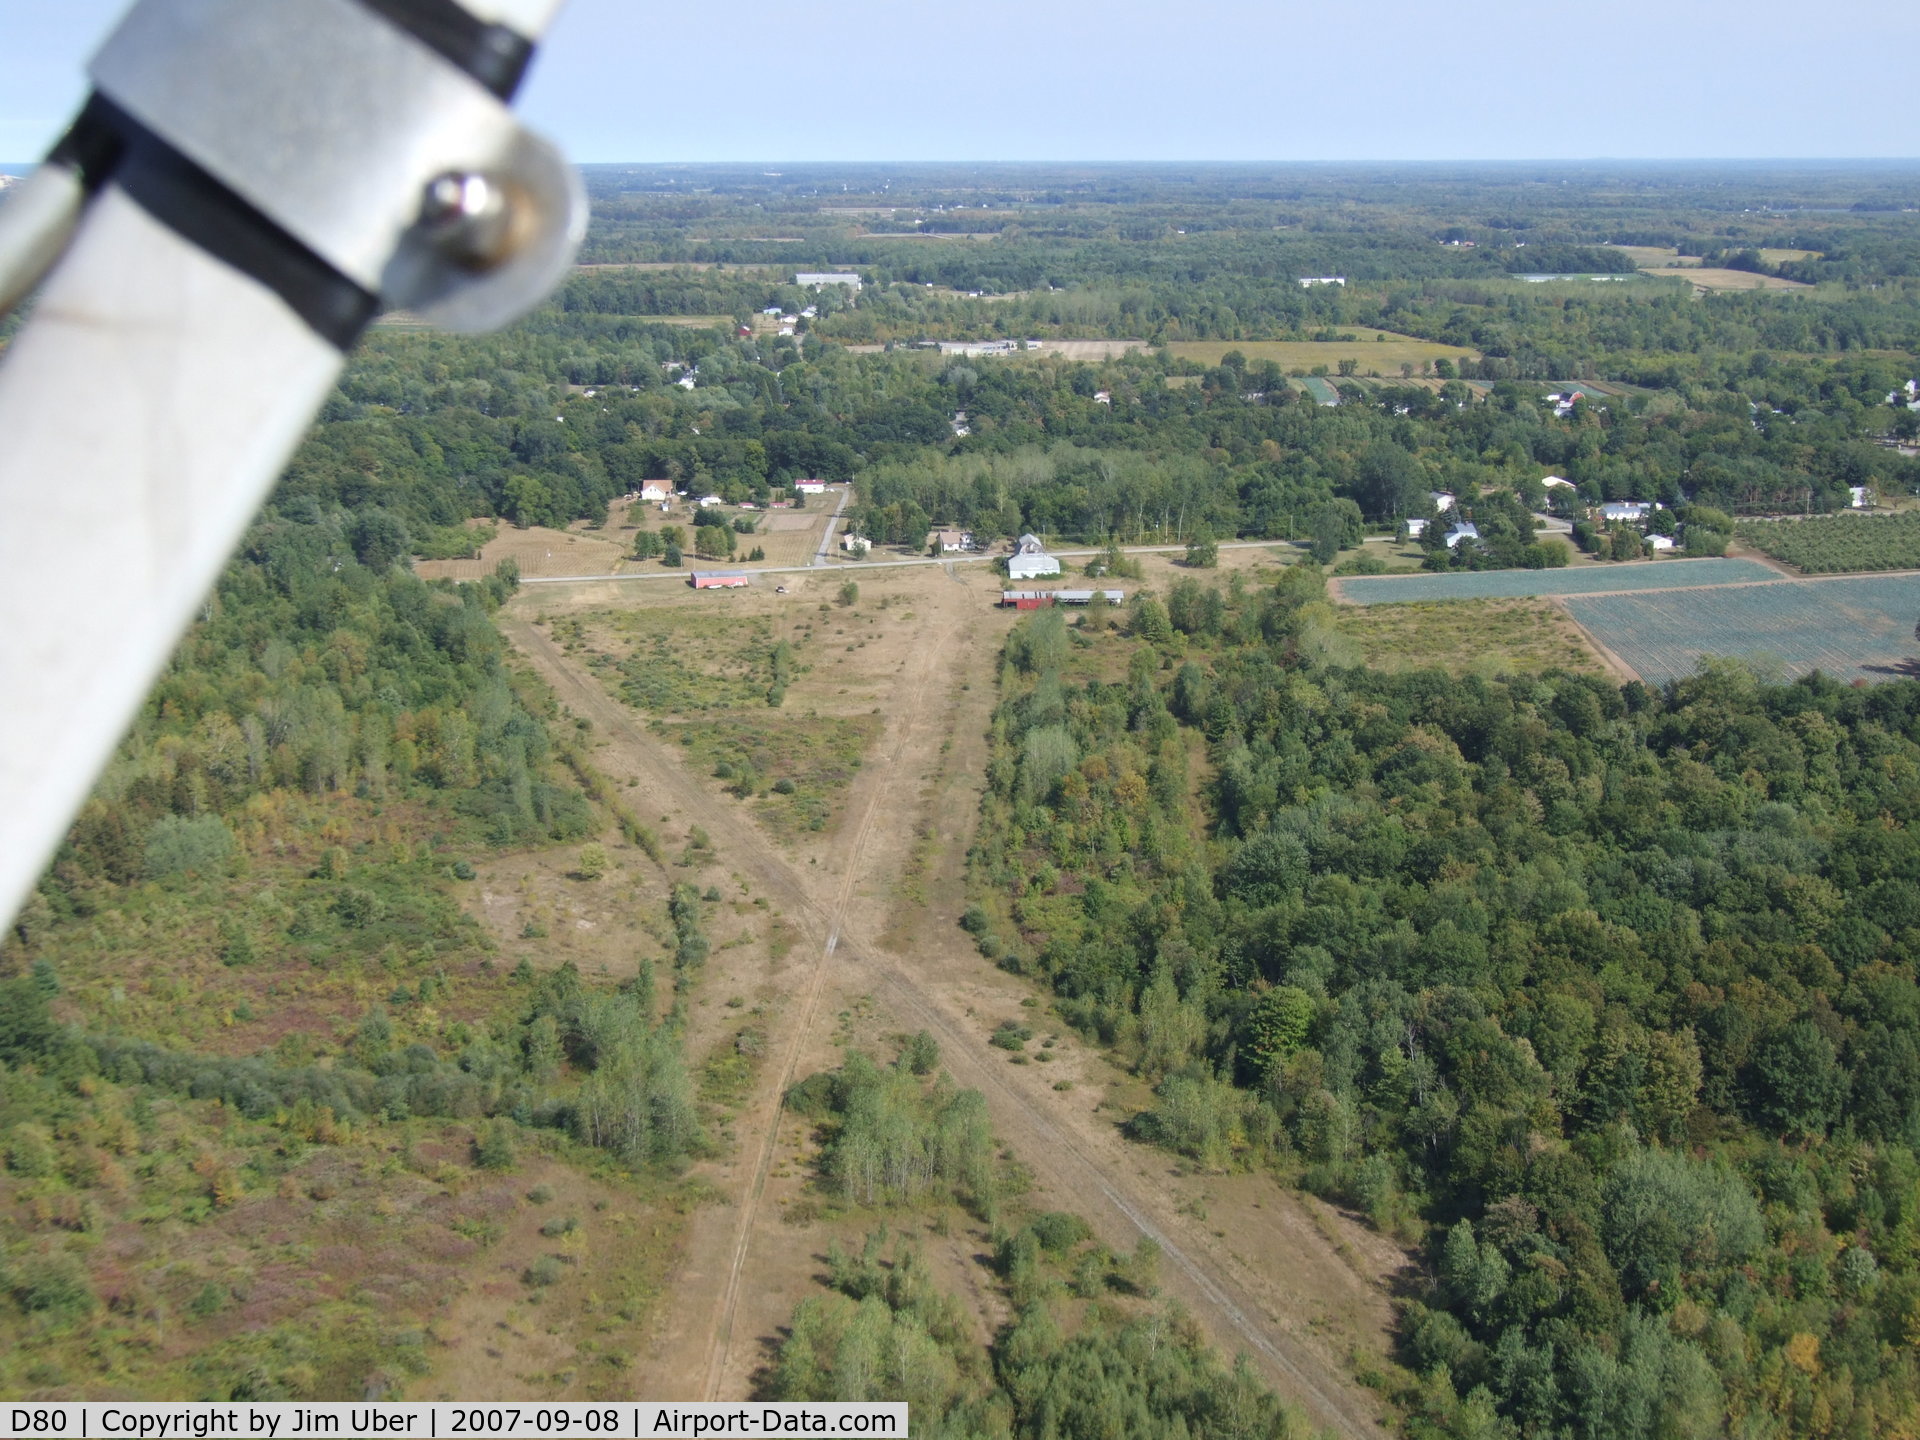 Olcott-newfane Airport (D80) - Looking east; it looks like ATV's and Minibikes have taken over